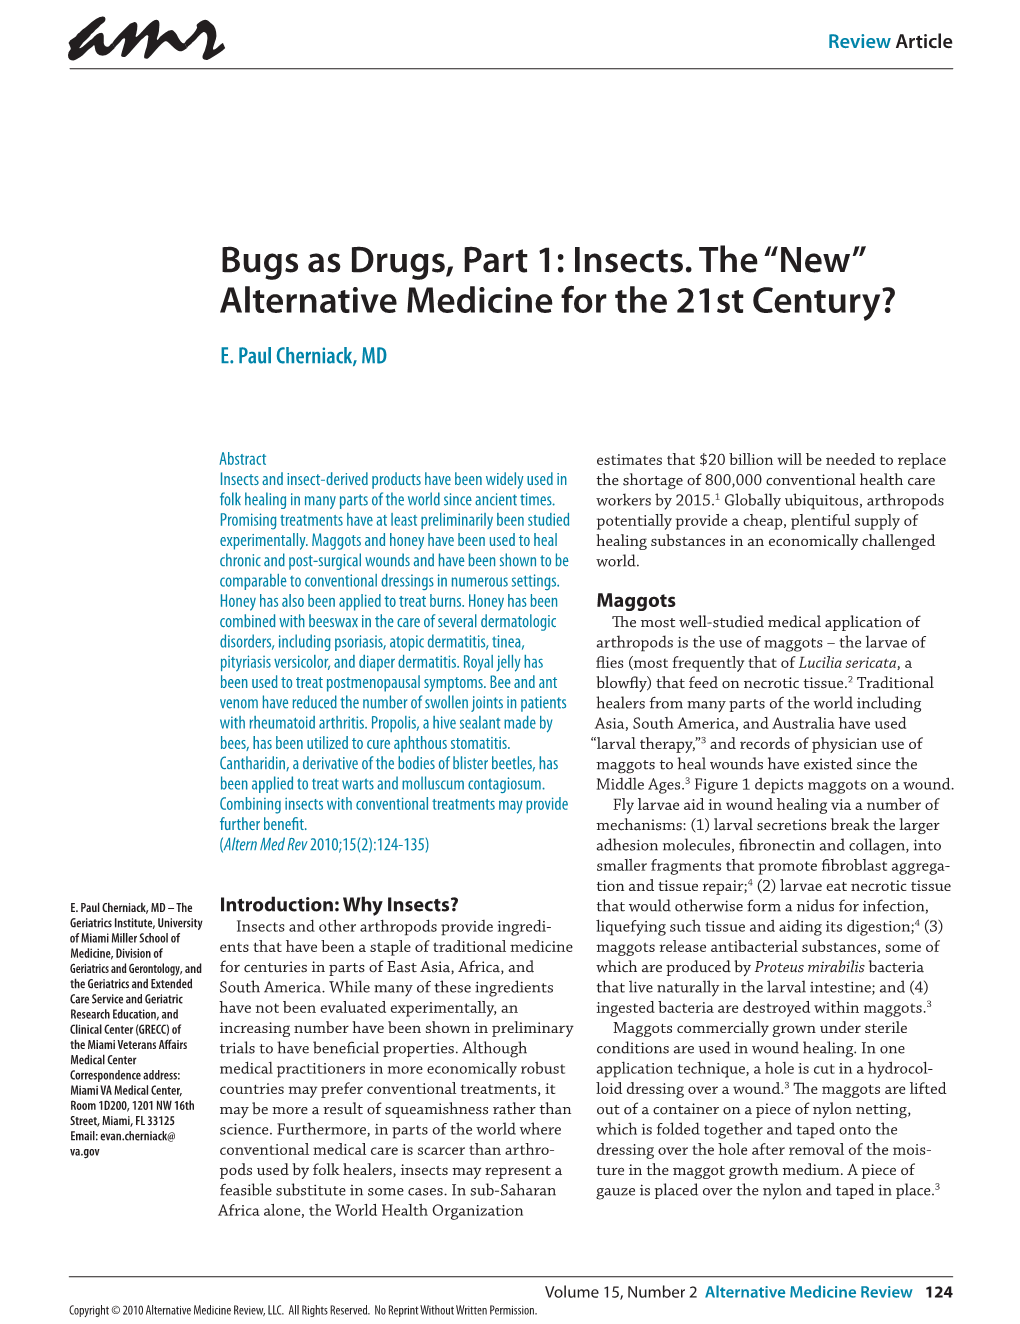 Bugs As Drugs, Part 1: Insects. the “New” Alternative Medicine for the 21St Century? E